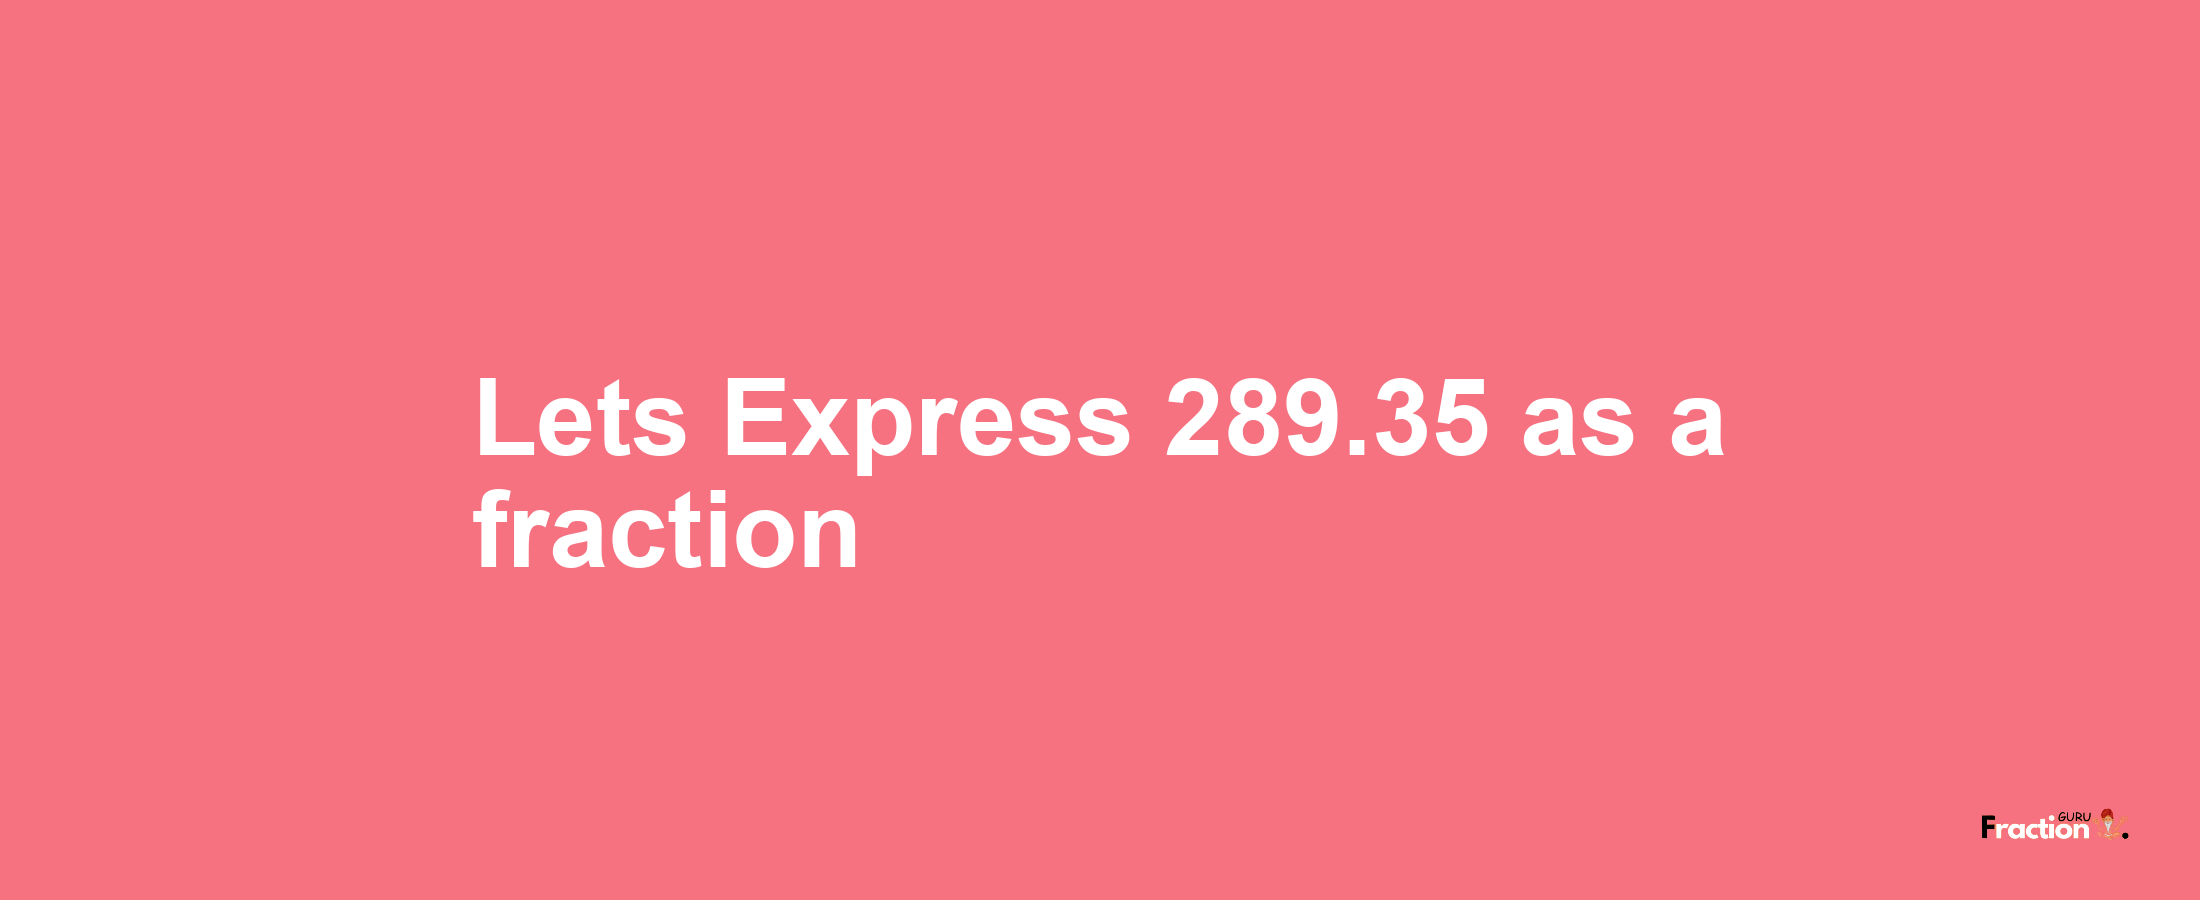 Lets Express 289.35 as afraction